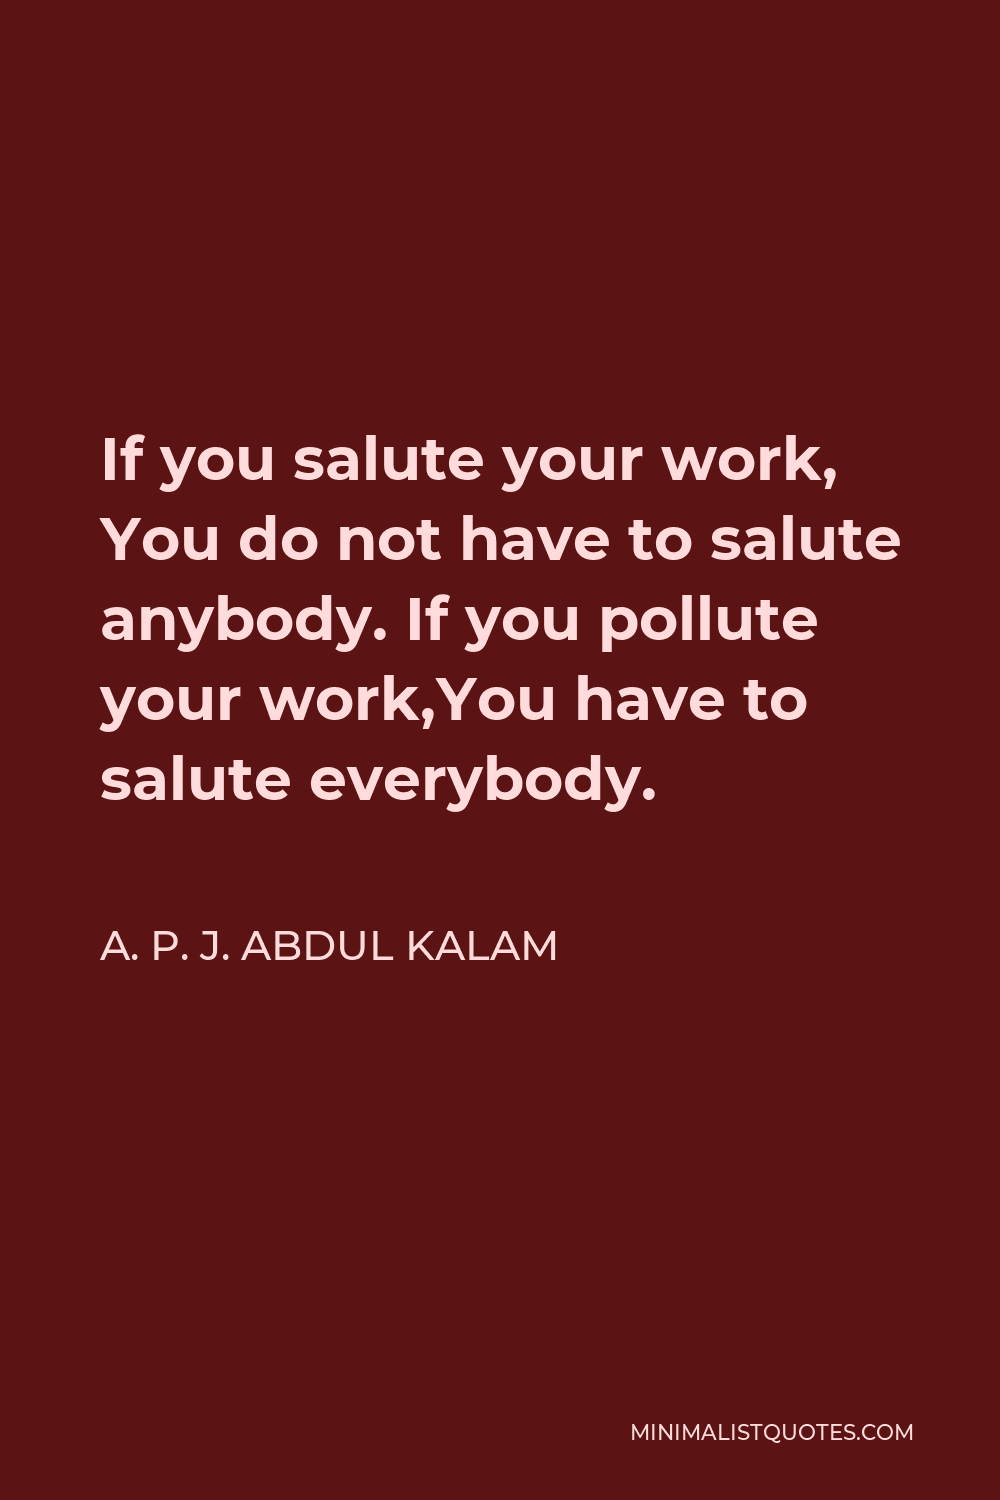 A. P. J. Abdul Kalam Quote - If you salute your work, You do not have to salute anybody. If you pollute your work,You have to salute everybody.